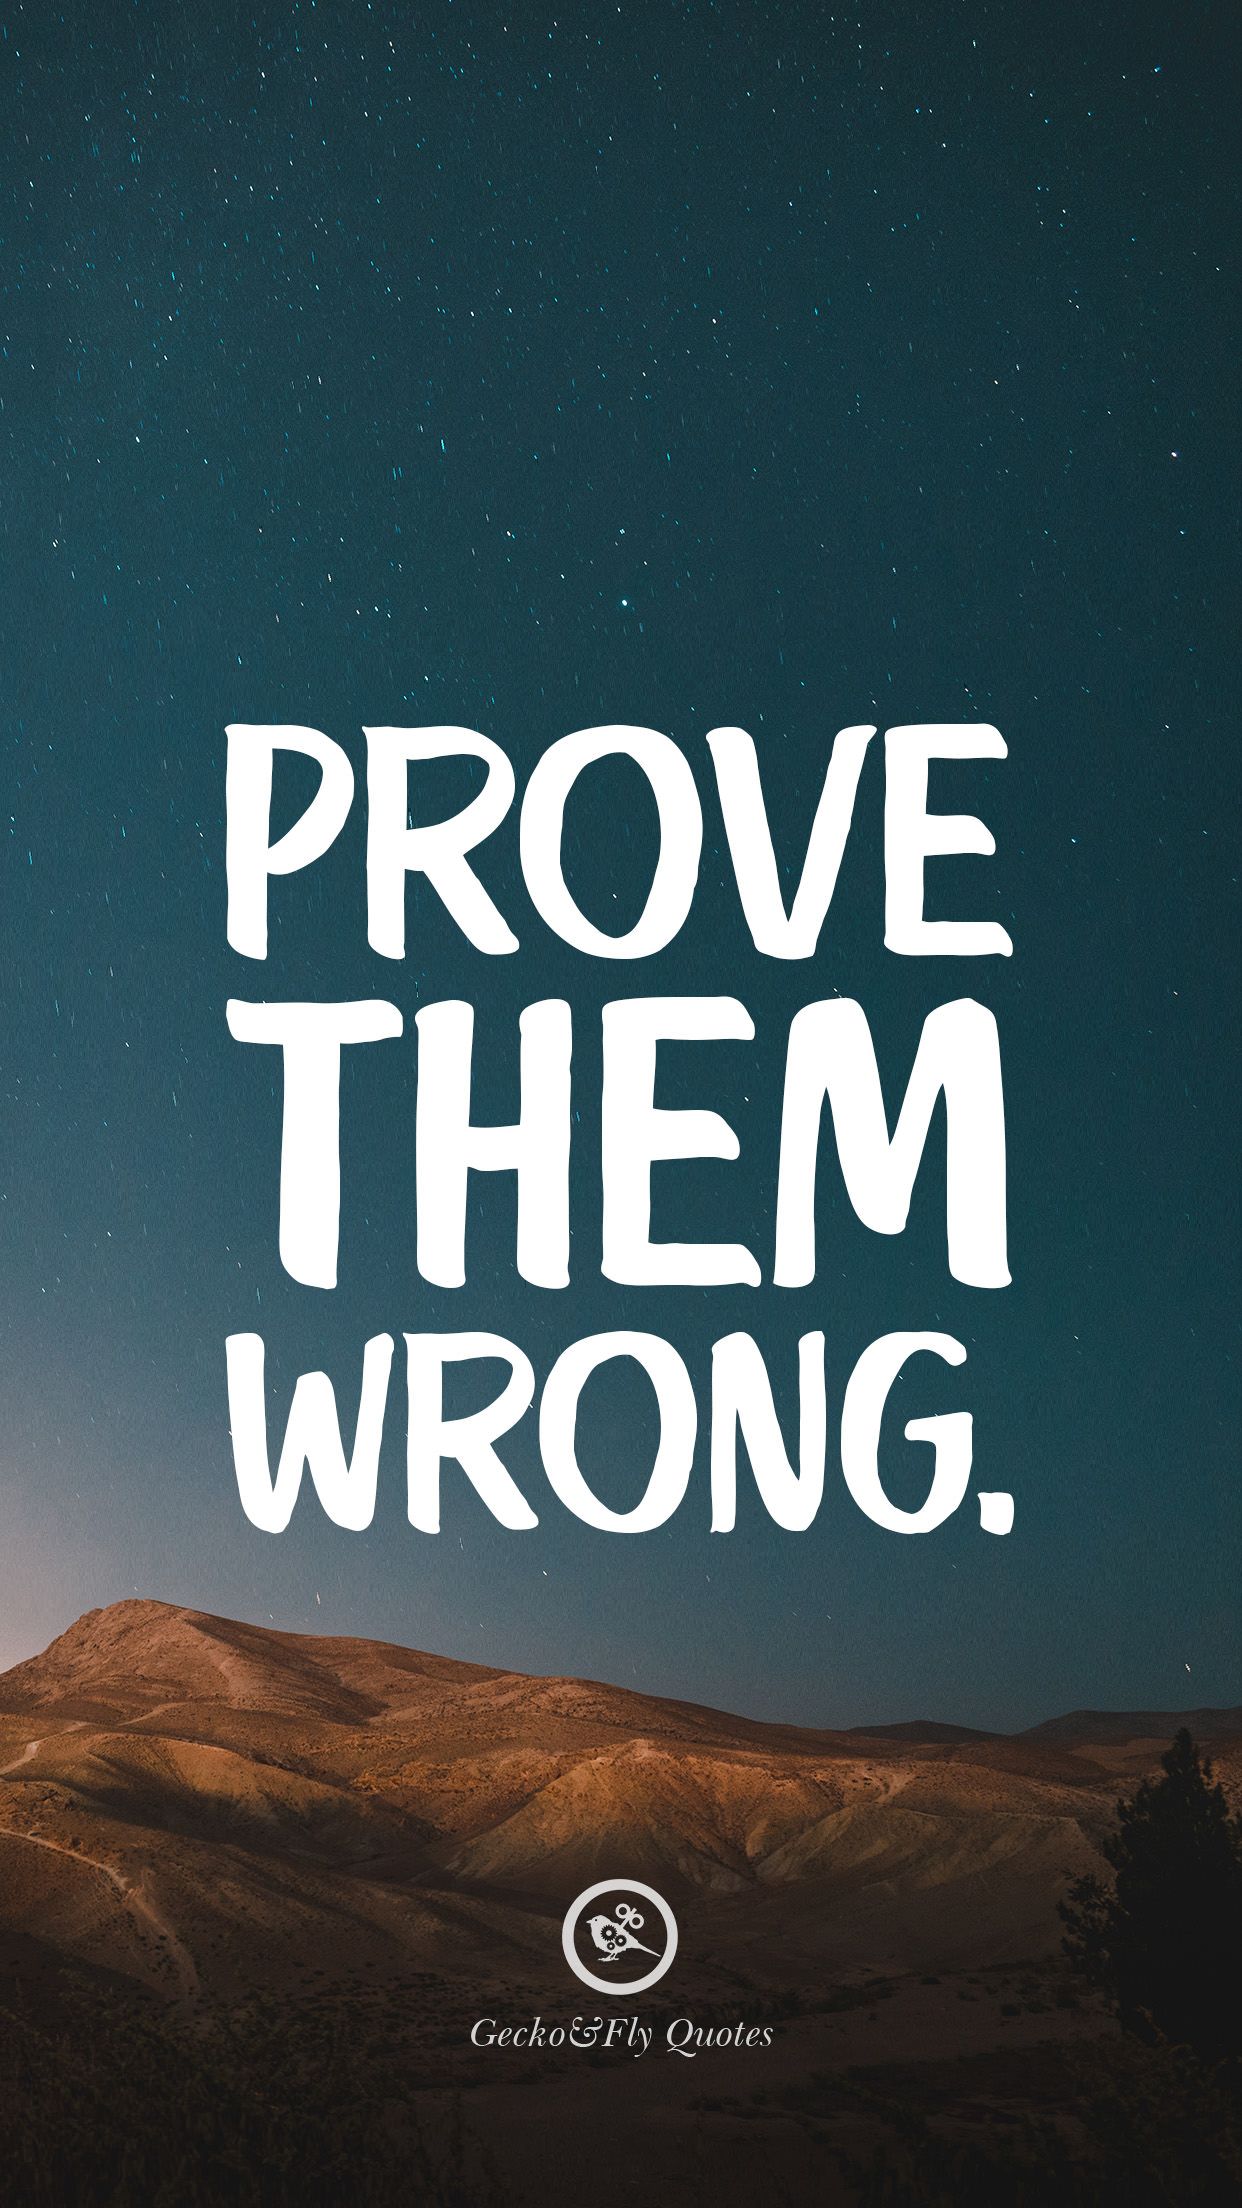 Prove Them Wrong HD Wallpaper Quotes Motivational